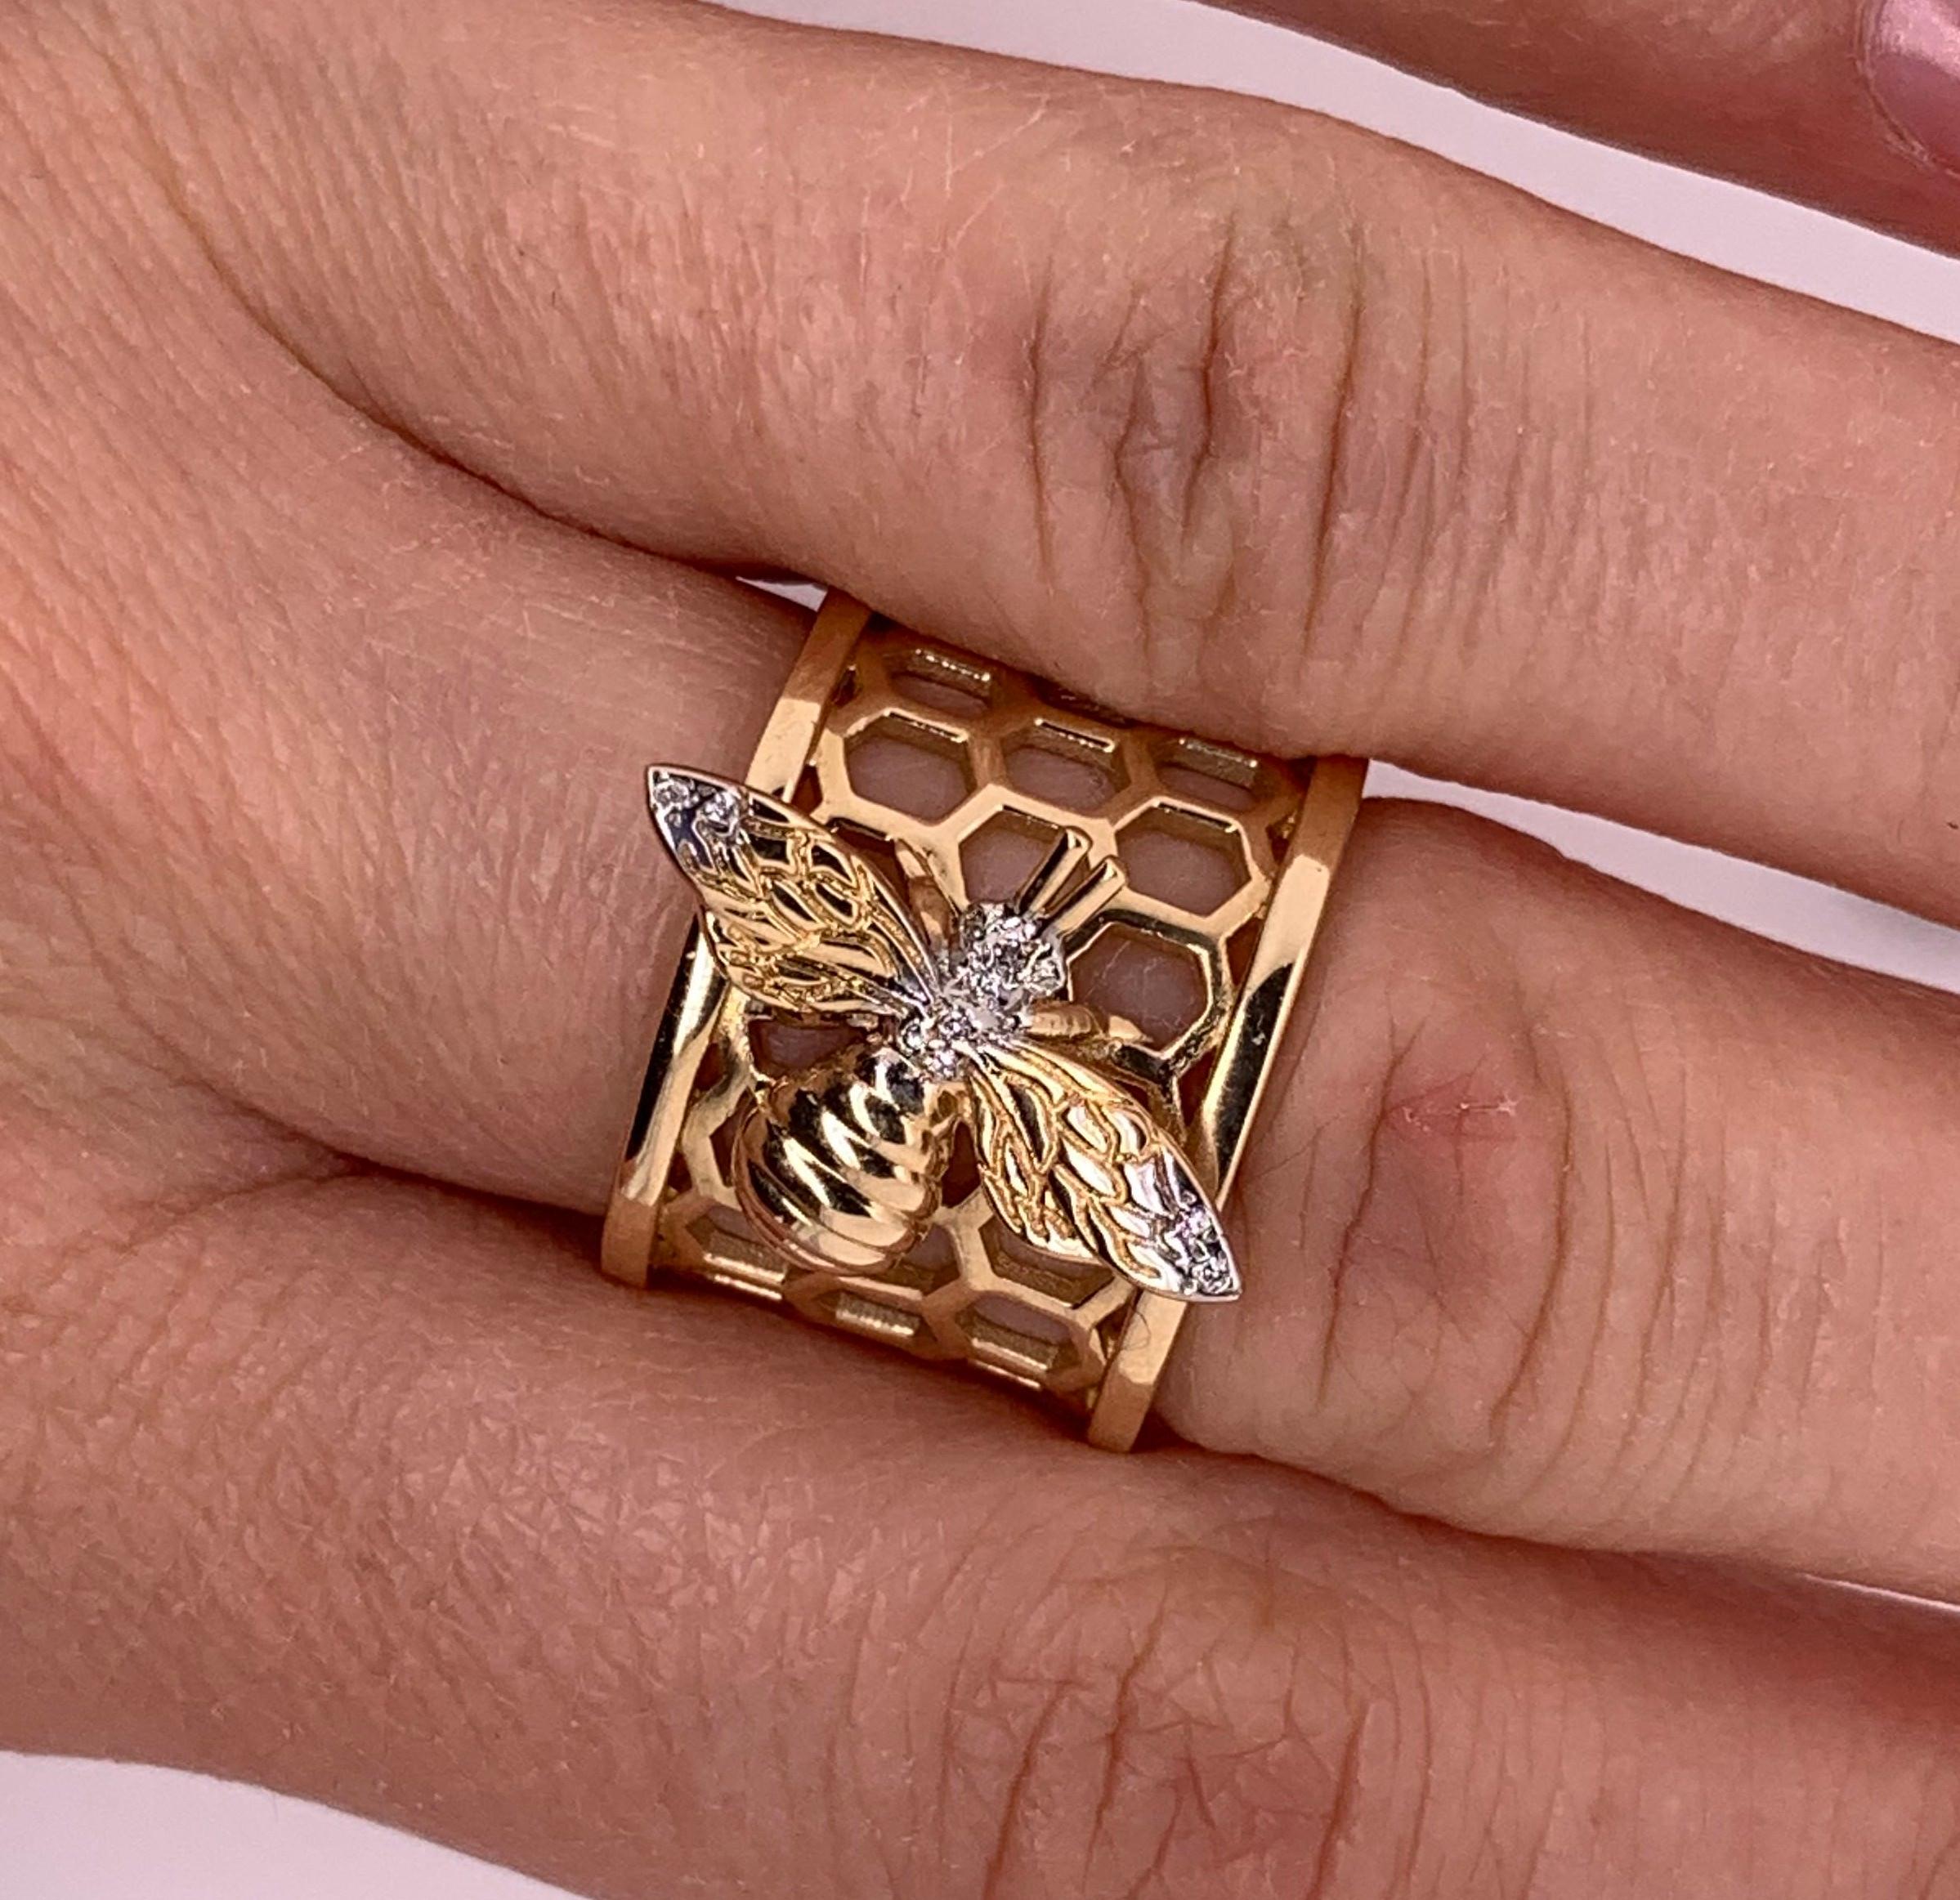 Material: 14K Yellow Gold 
Diamond Details: Brilliant Round White Diamonds at 0.05 Carats. SI Clarity / H-I Color. 
Ring Size: 6. This ring can be remade in your desired size at no additional cost - 2 week production time. 

Fine one-of-a kind